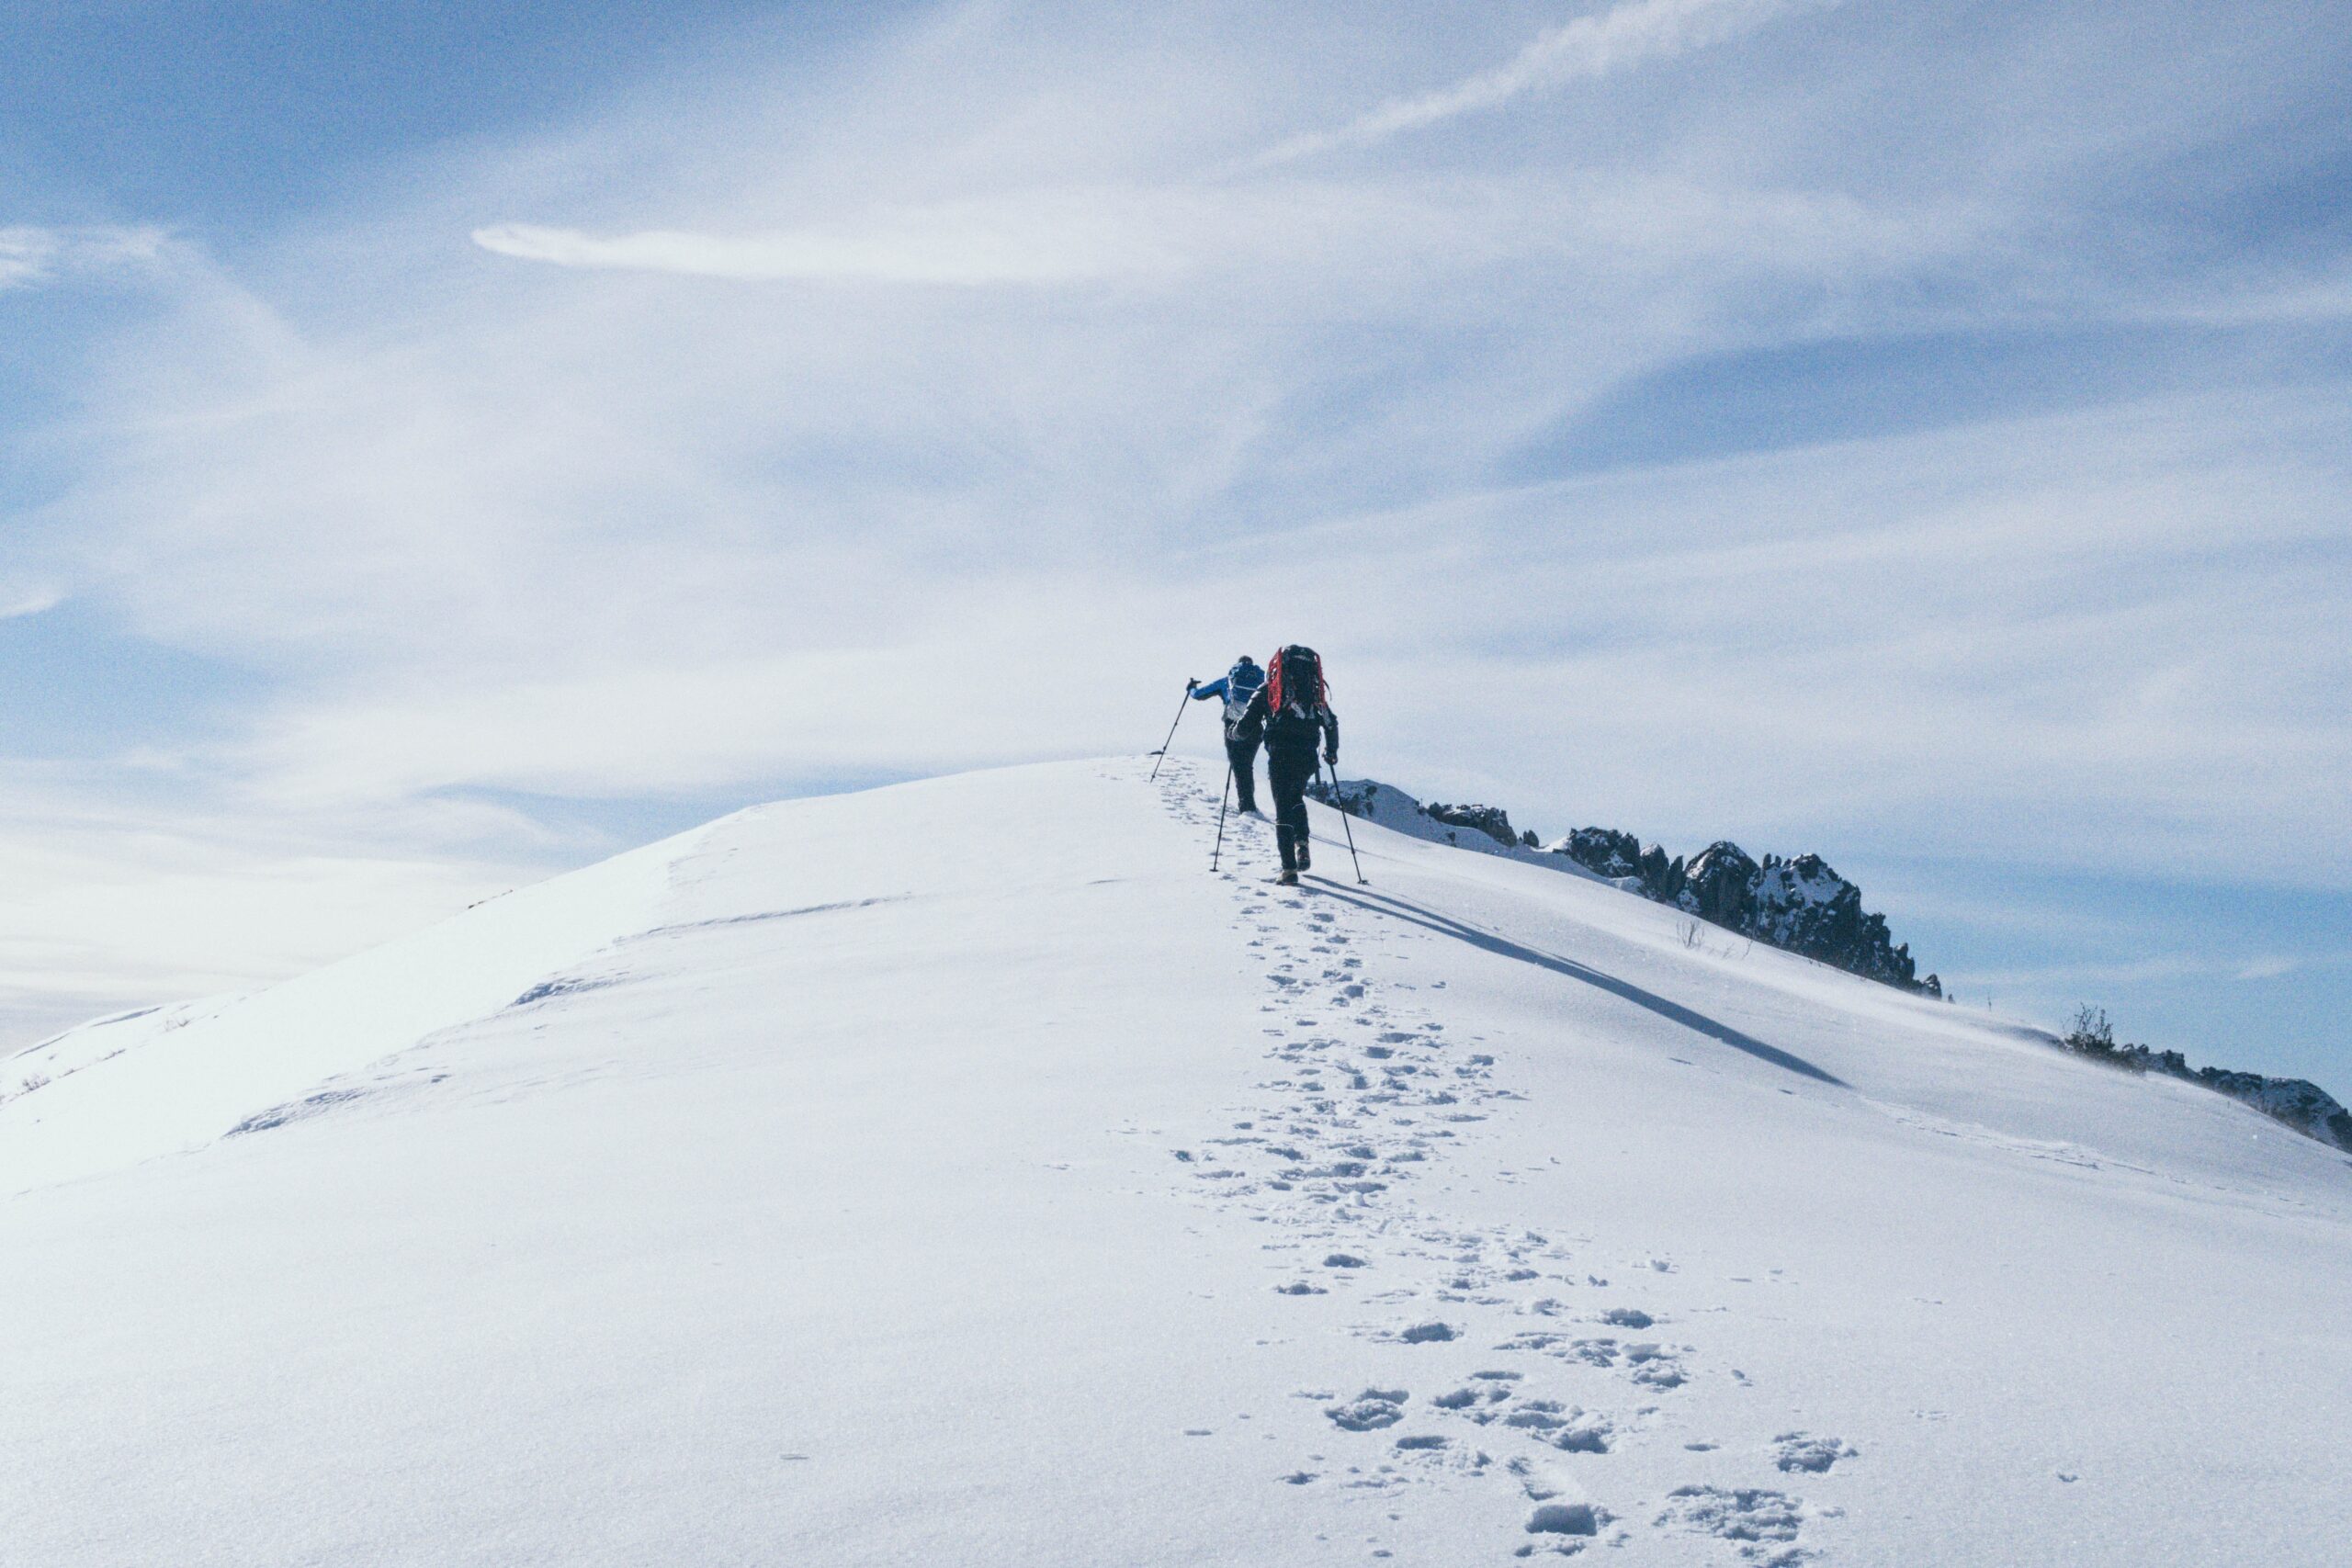 Two people hiking up a snowy slope